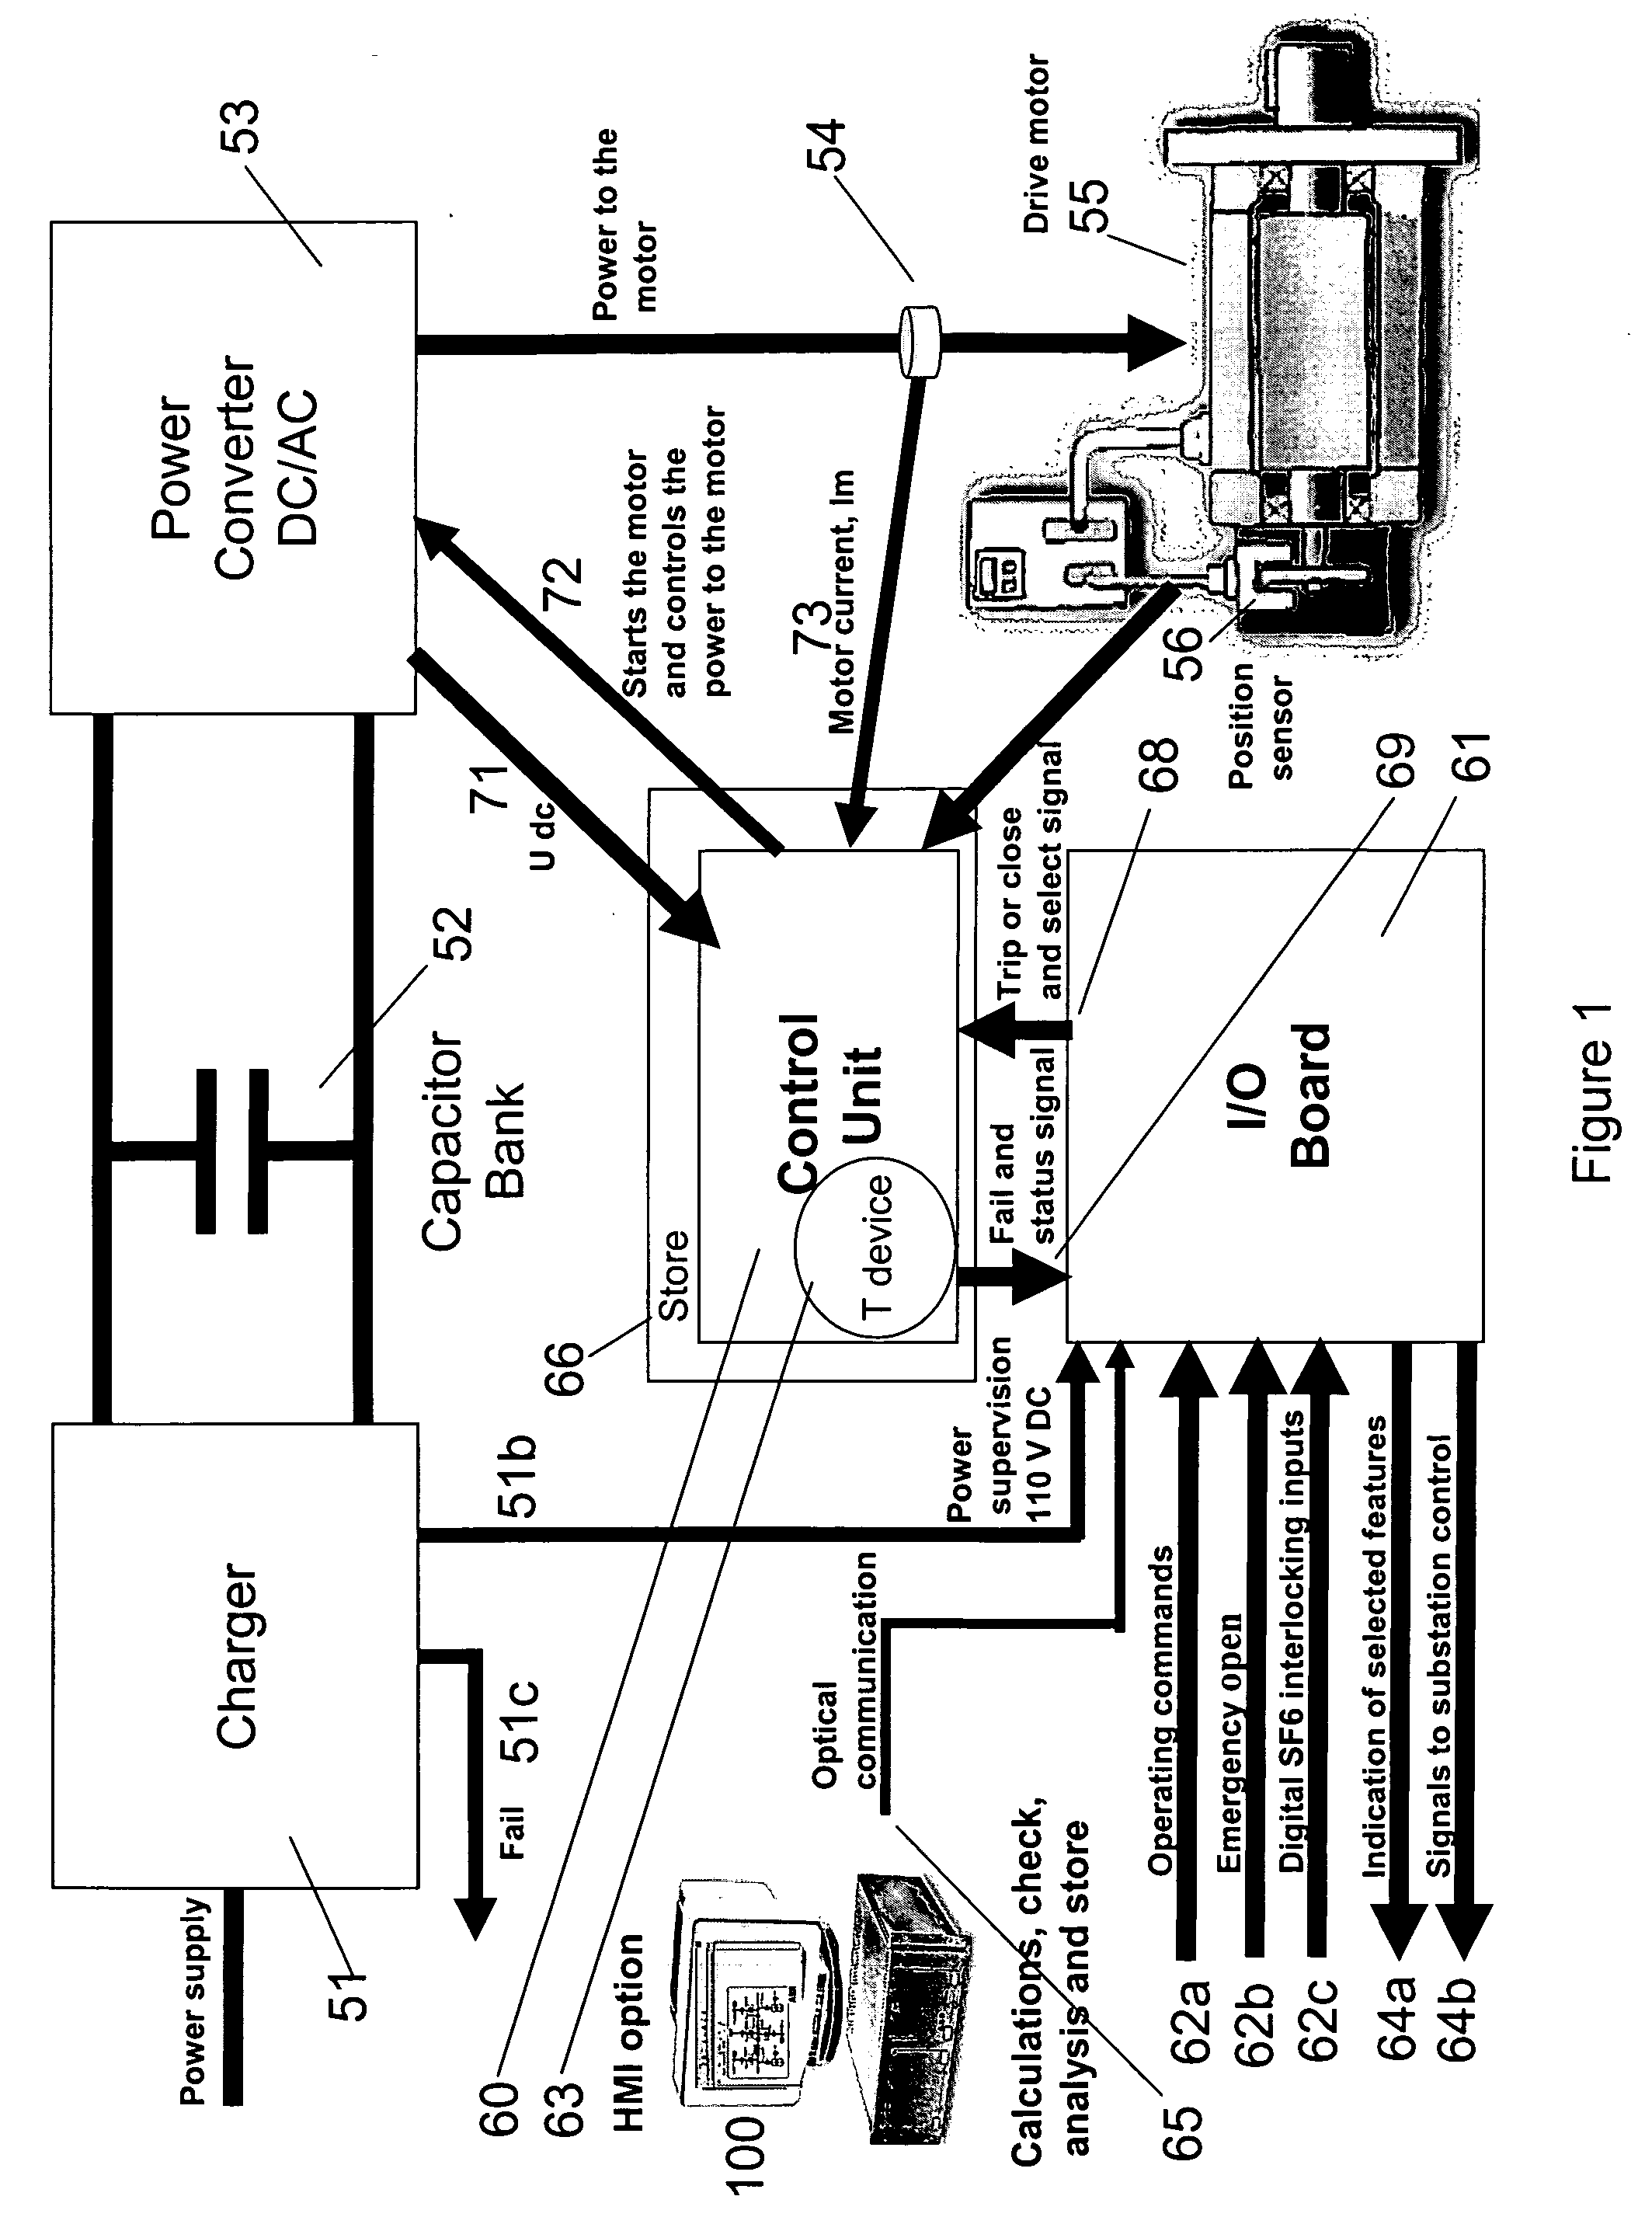 Condition monitor for an electrical distribution device